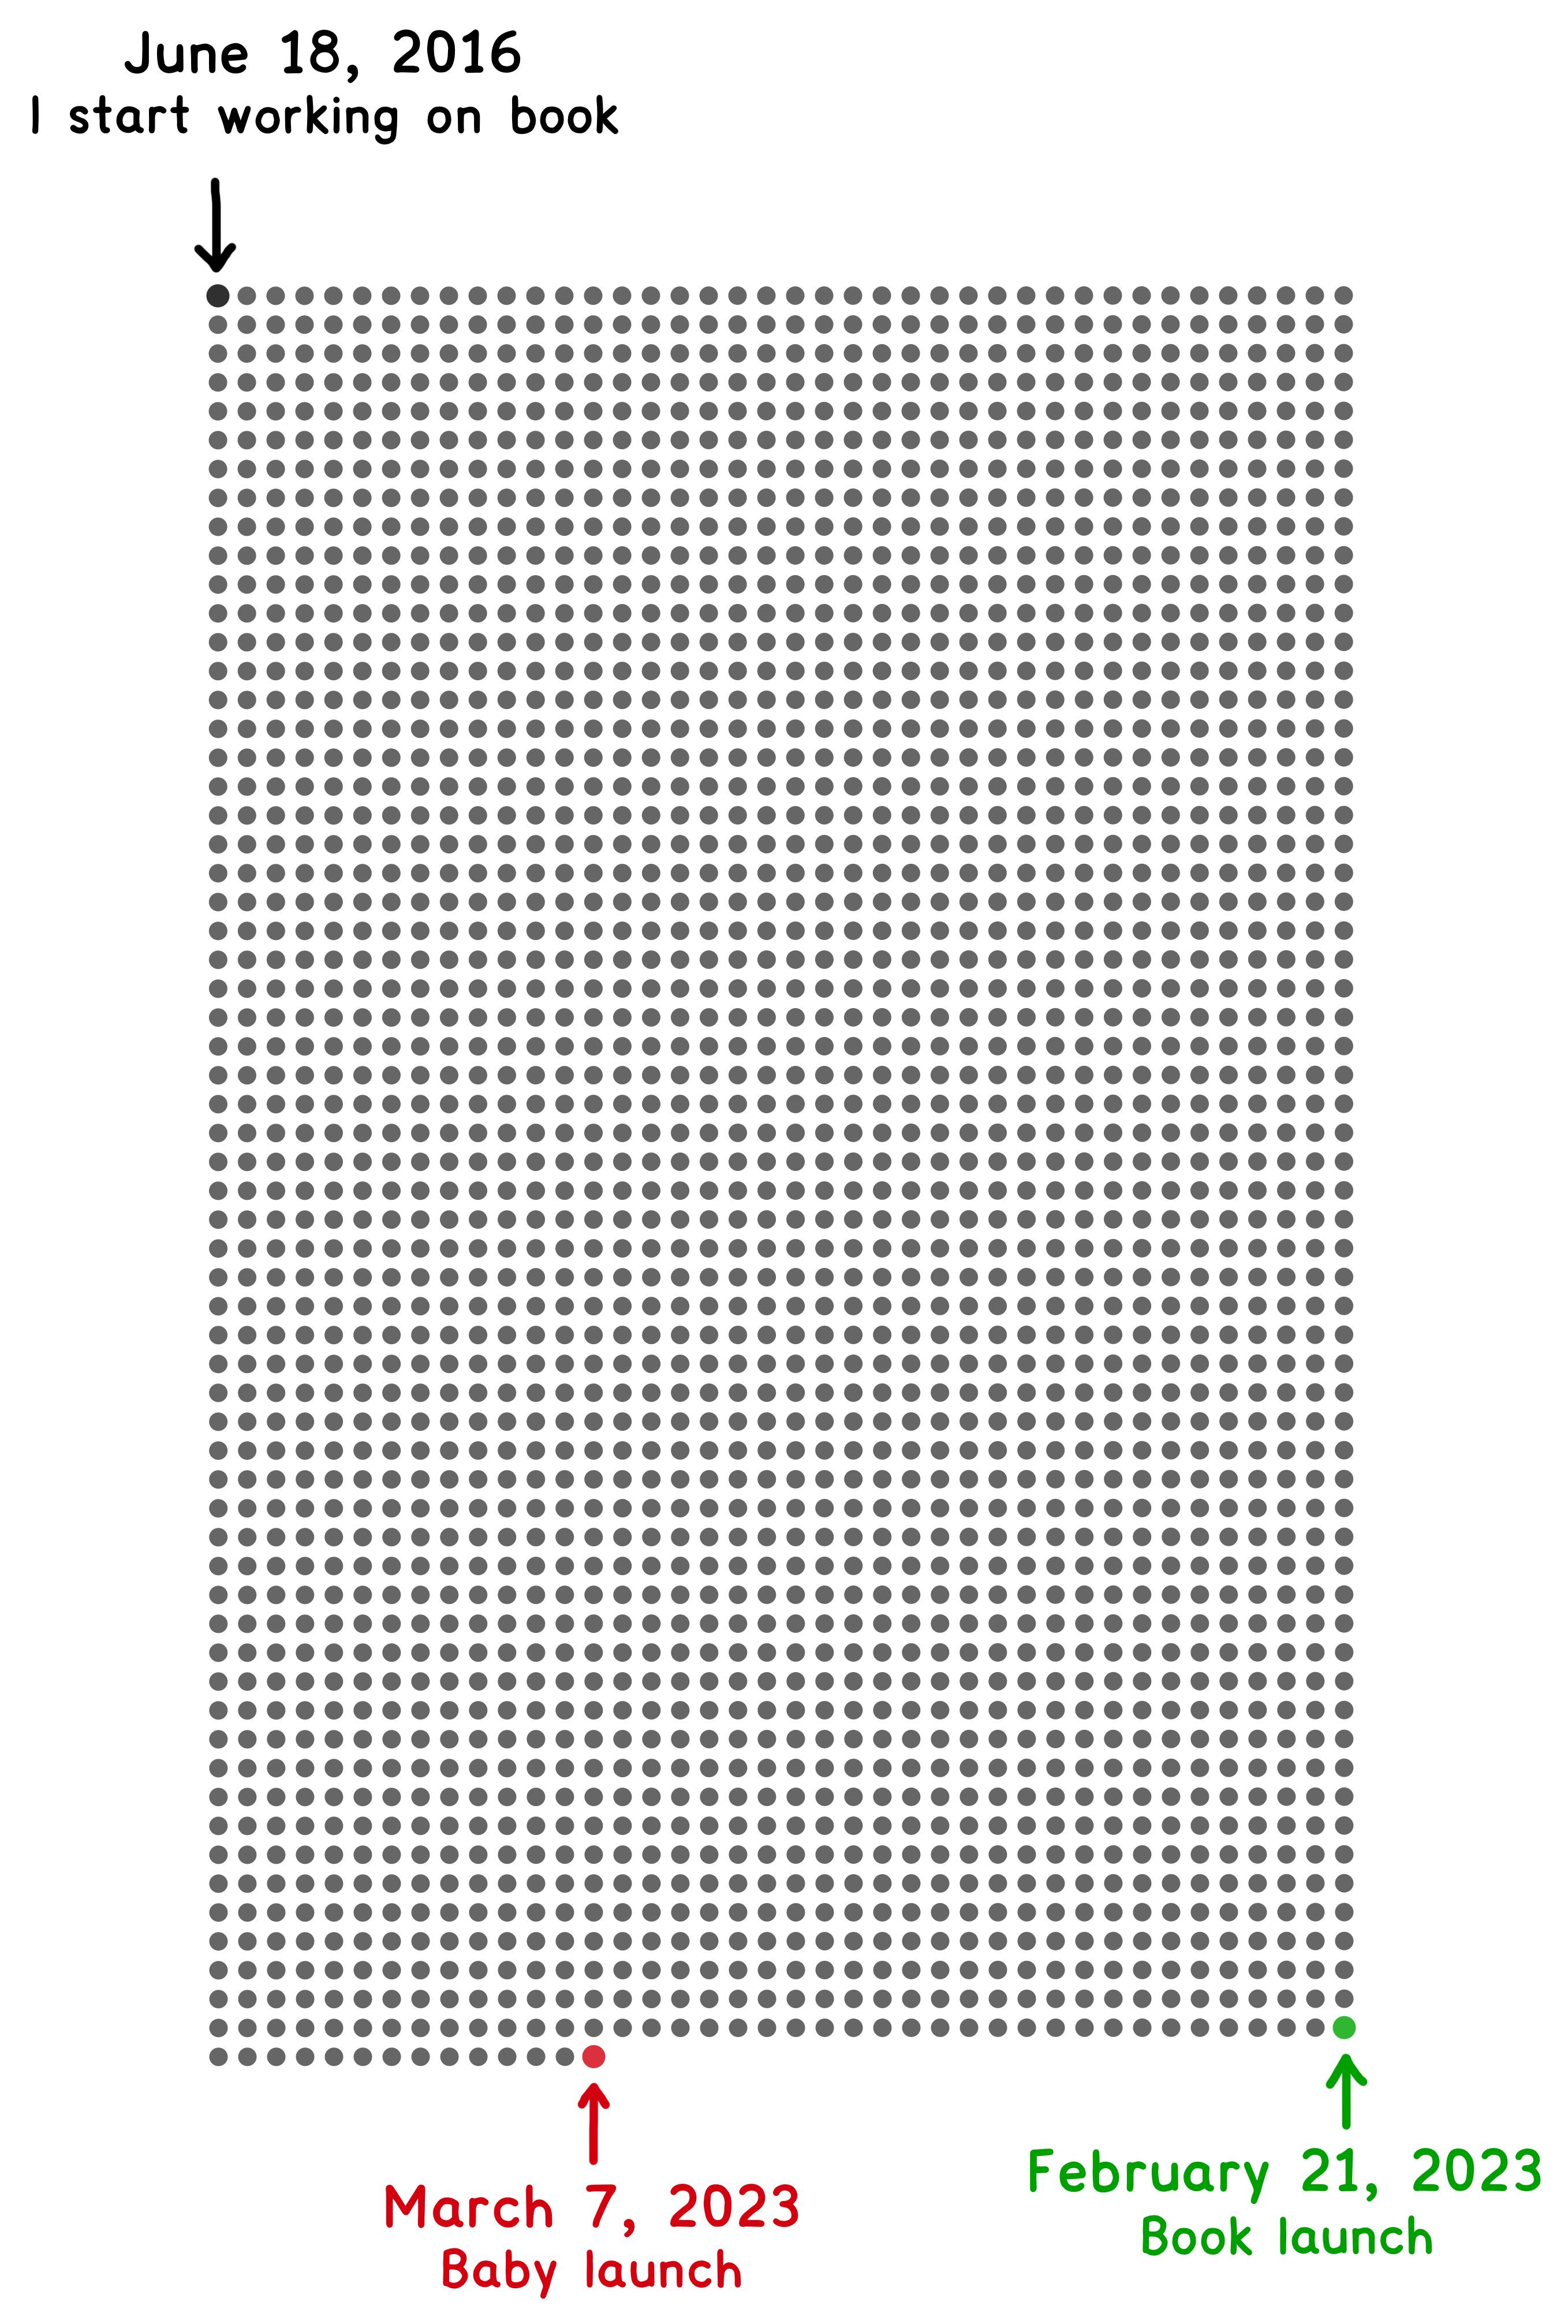 Grid of dots where each dot is one day. June 18, 2016: I start walking on a book.. February 21, 2023: Book launch. March 7, 2023: Baby launch.